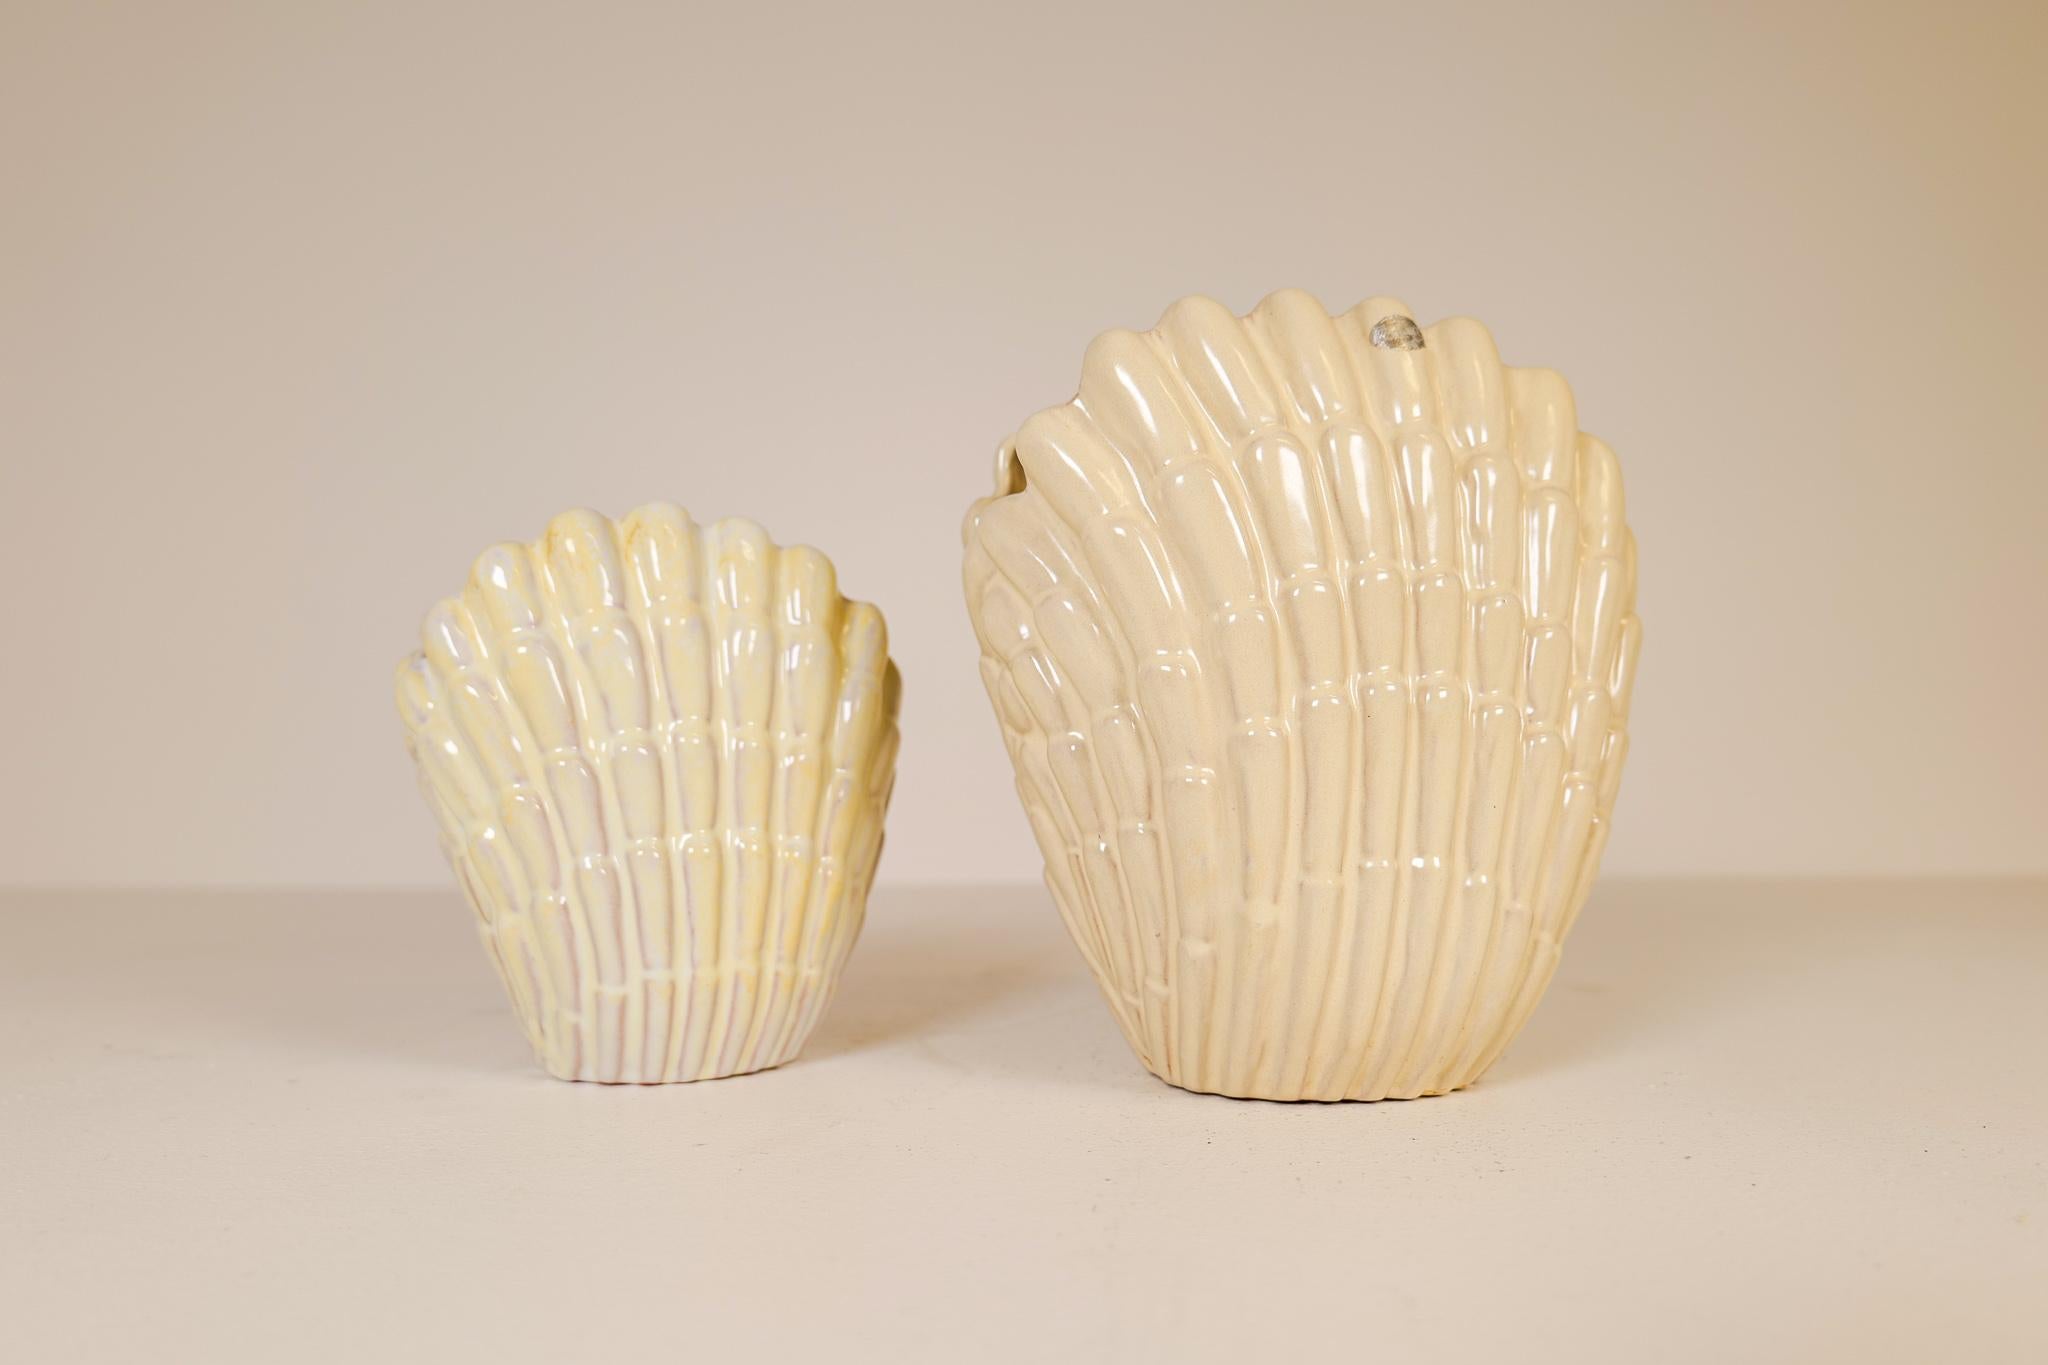 Seashell vases Designed by Vicke Lindstrand for Upsala Ekeby in Sweden during the 1940s. This pair gives a good impression and are a good example of the great craftmanship in Sweden during this time. One large and one little, smaller version of